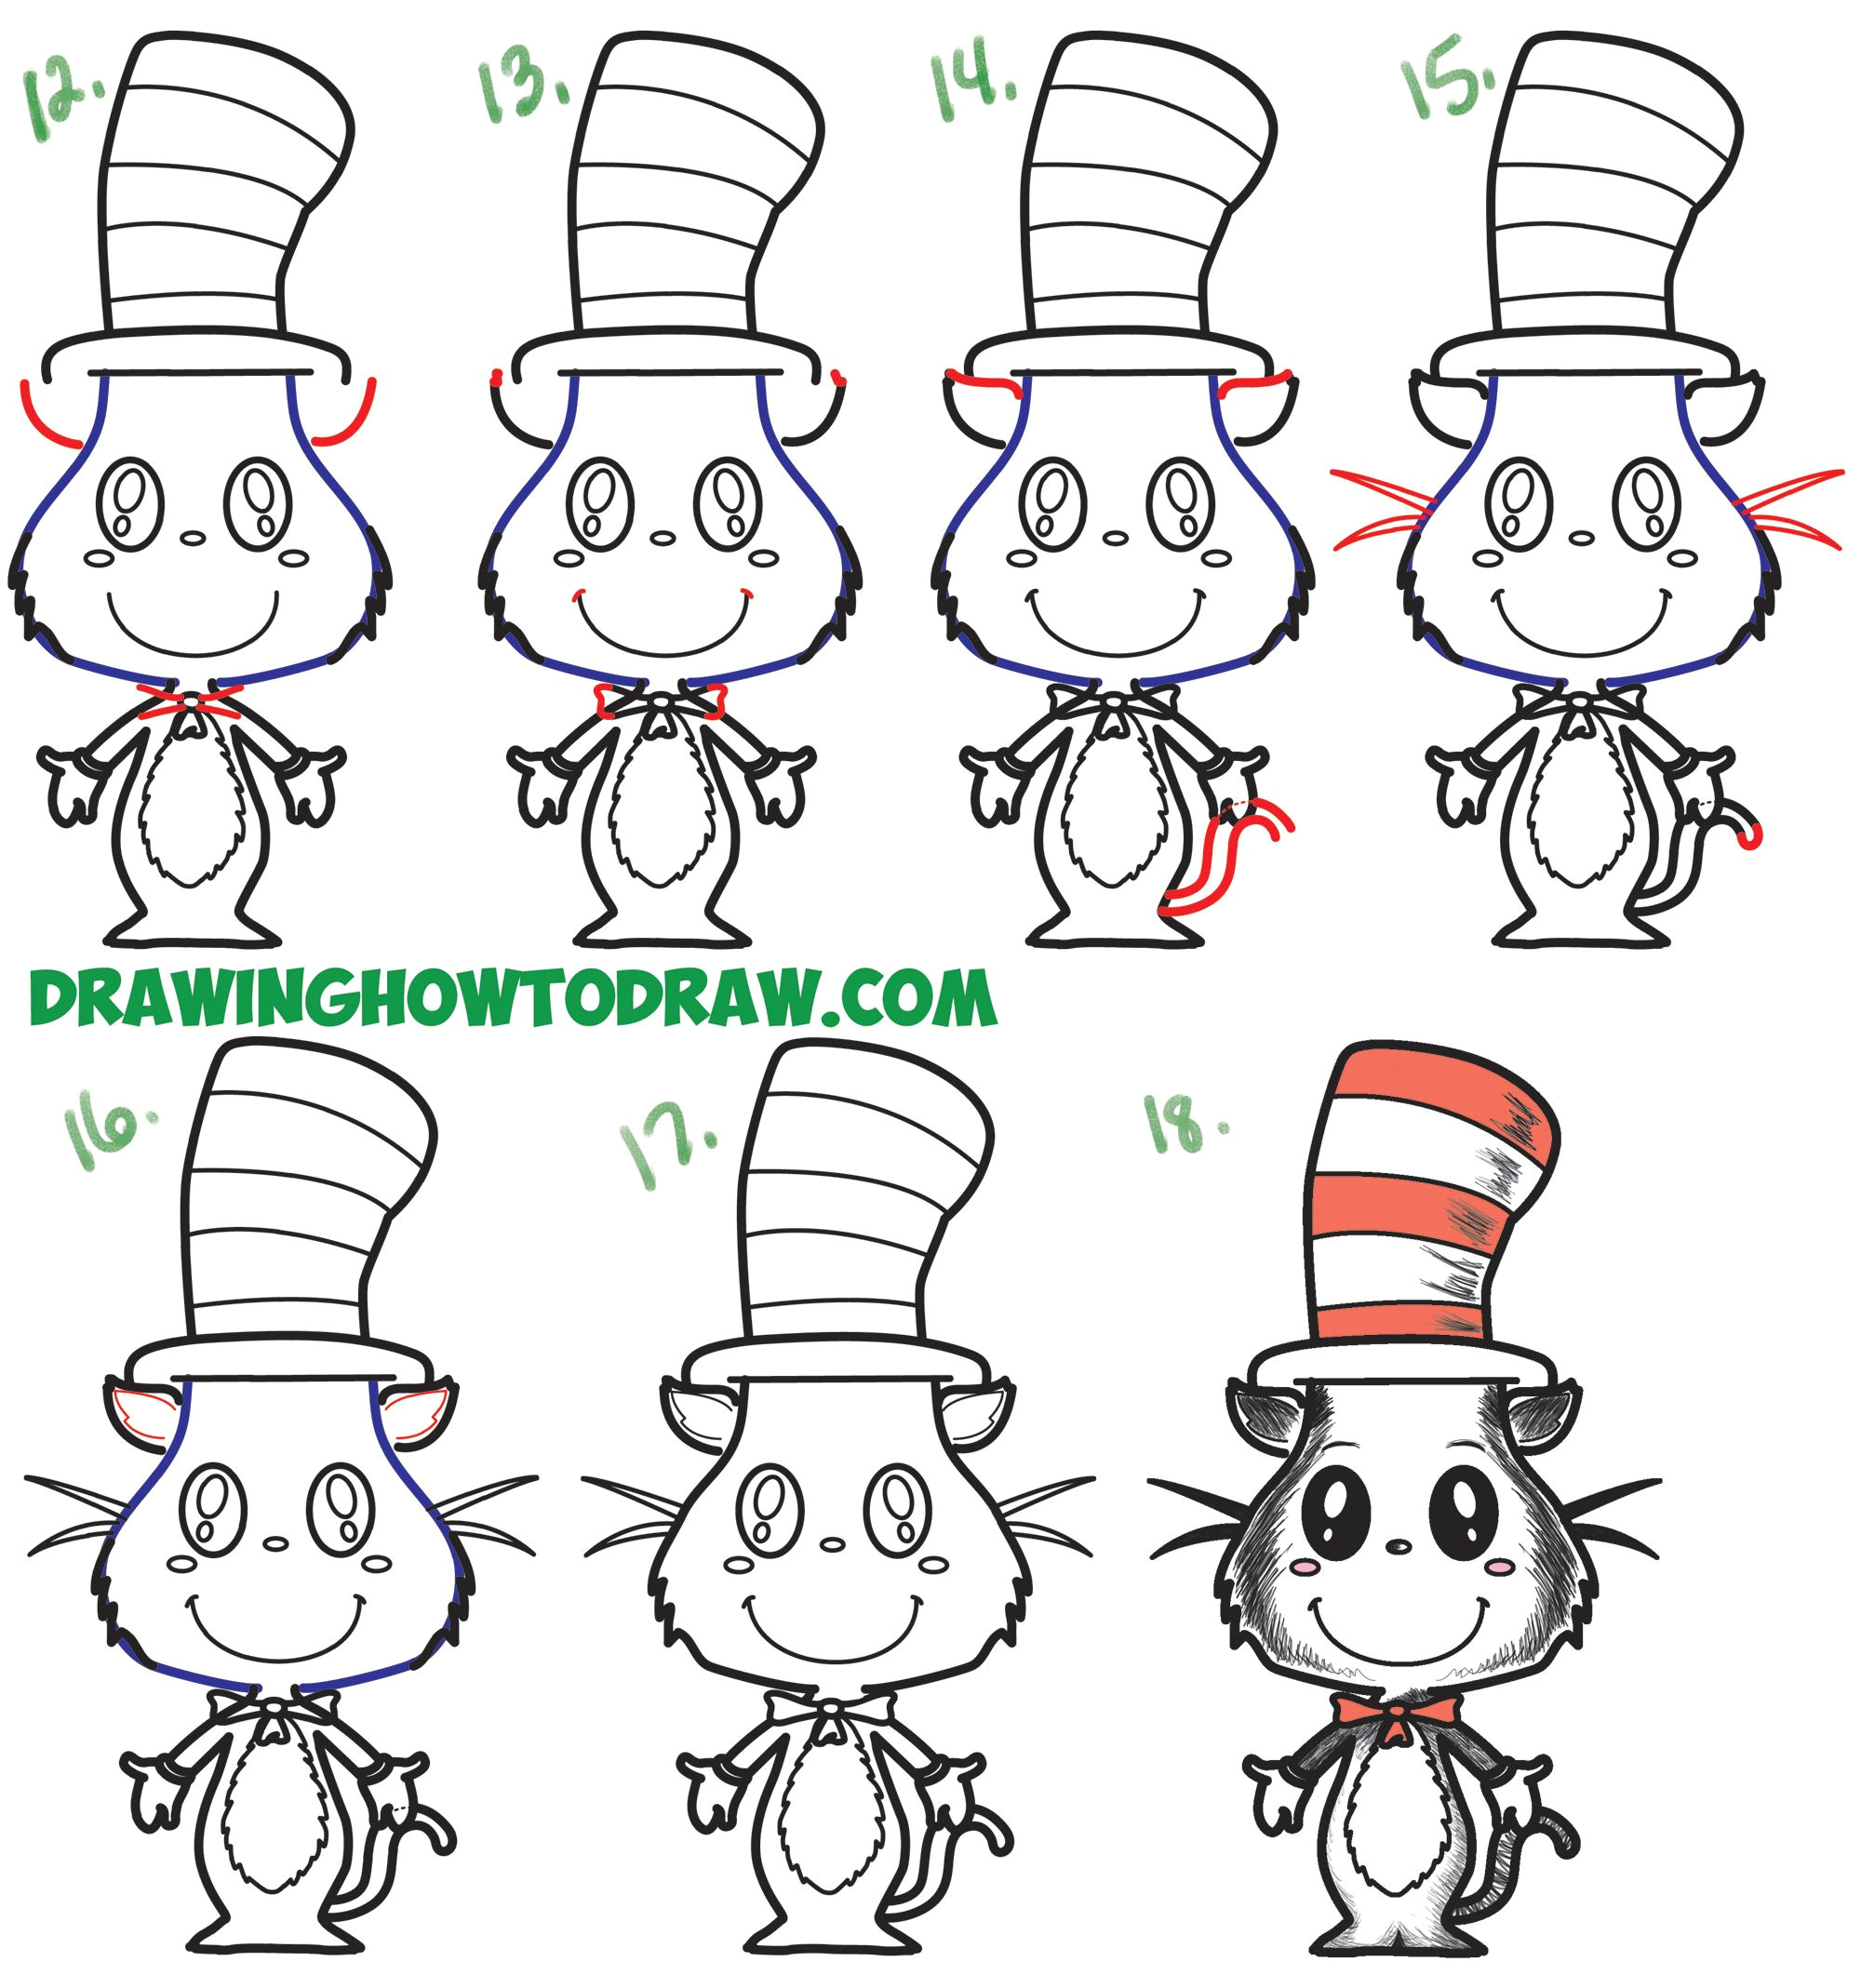 Cute Drawing Ideas Step by Step How to Draw the Cat In the Hat Cute Kawaii Chibi Version Easy